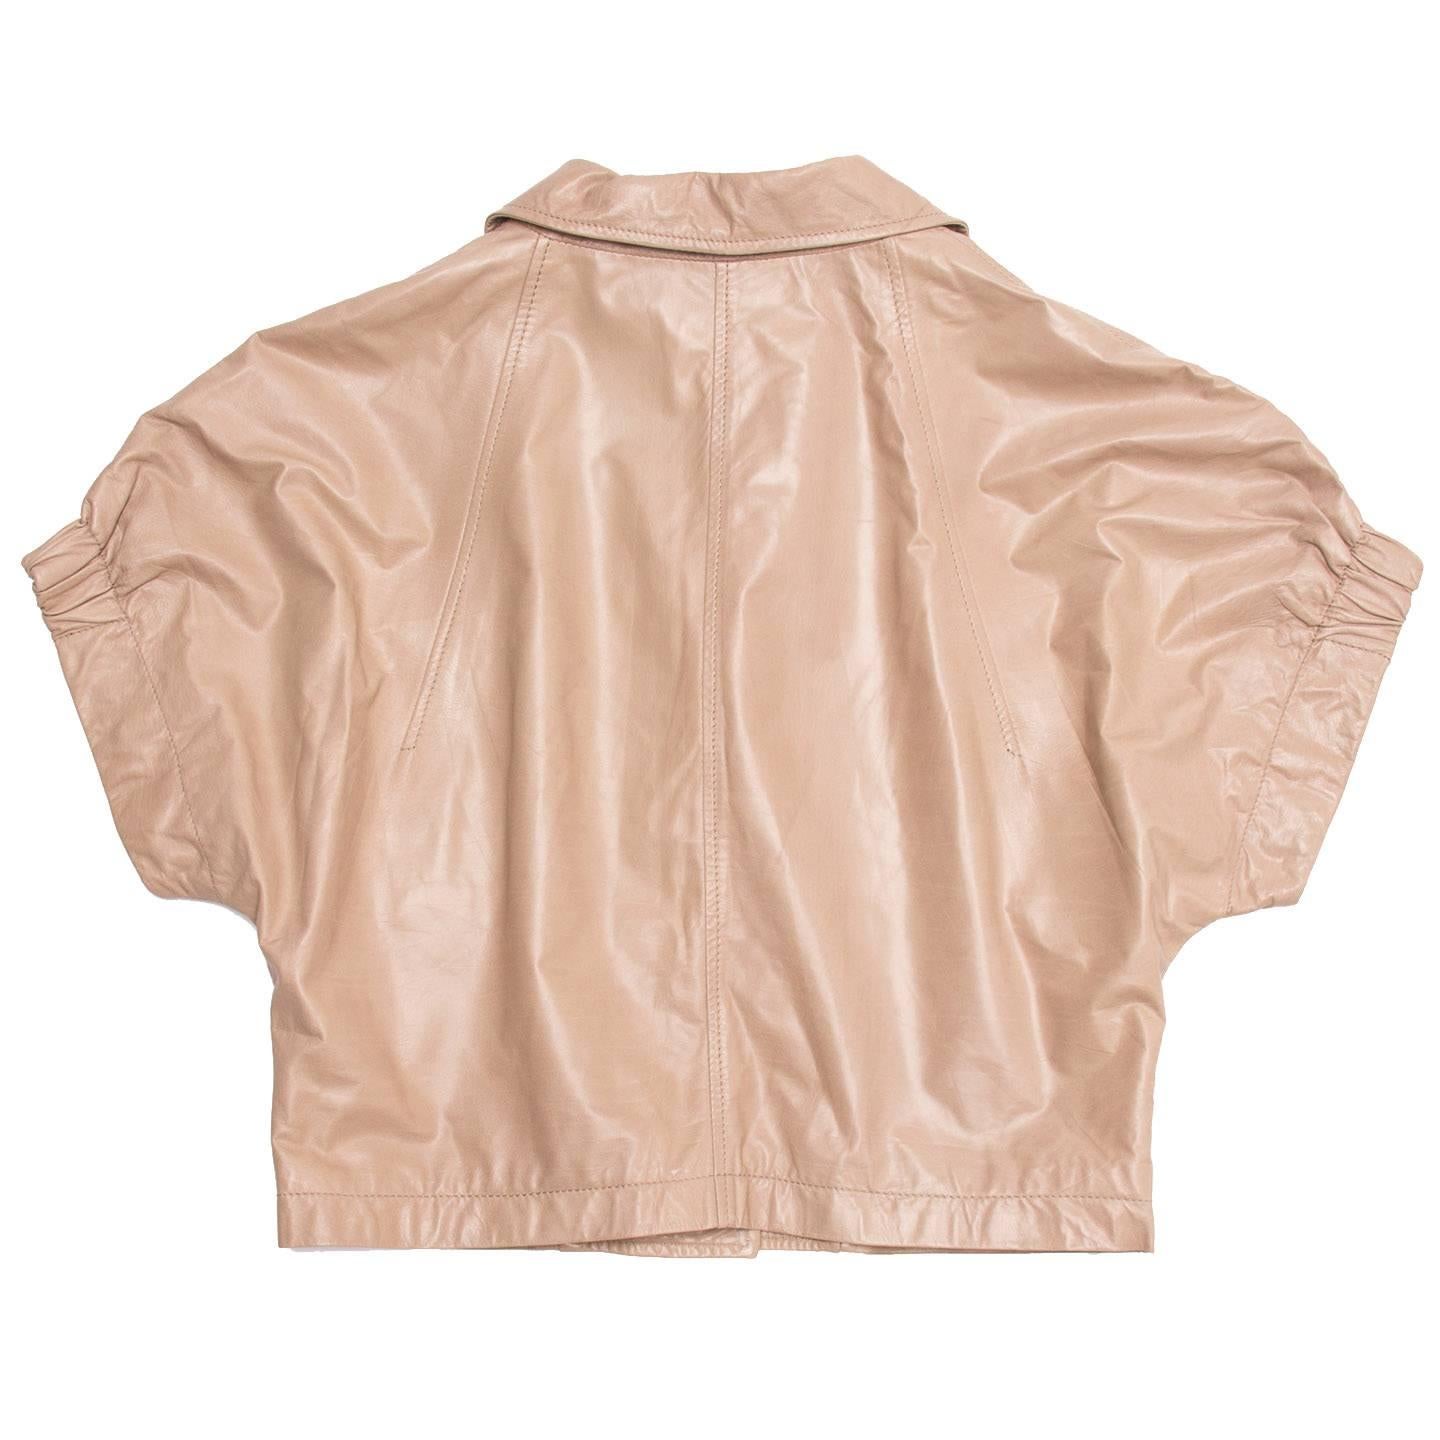 Prada Tan Cropped Leather Jacket In New Condition For Sale In Brooklyn, NY